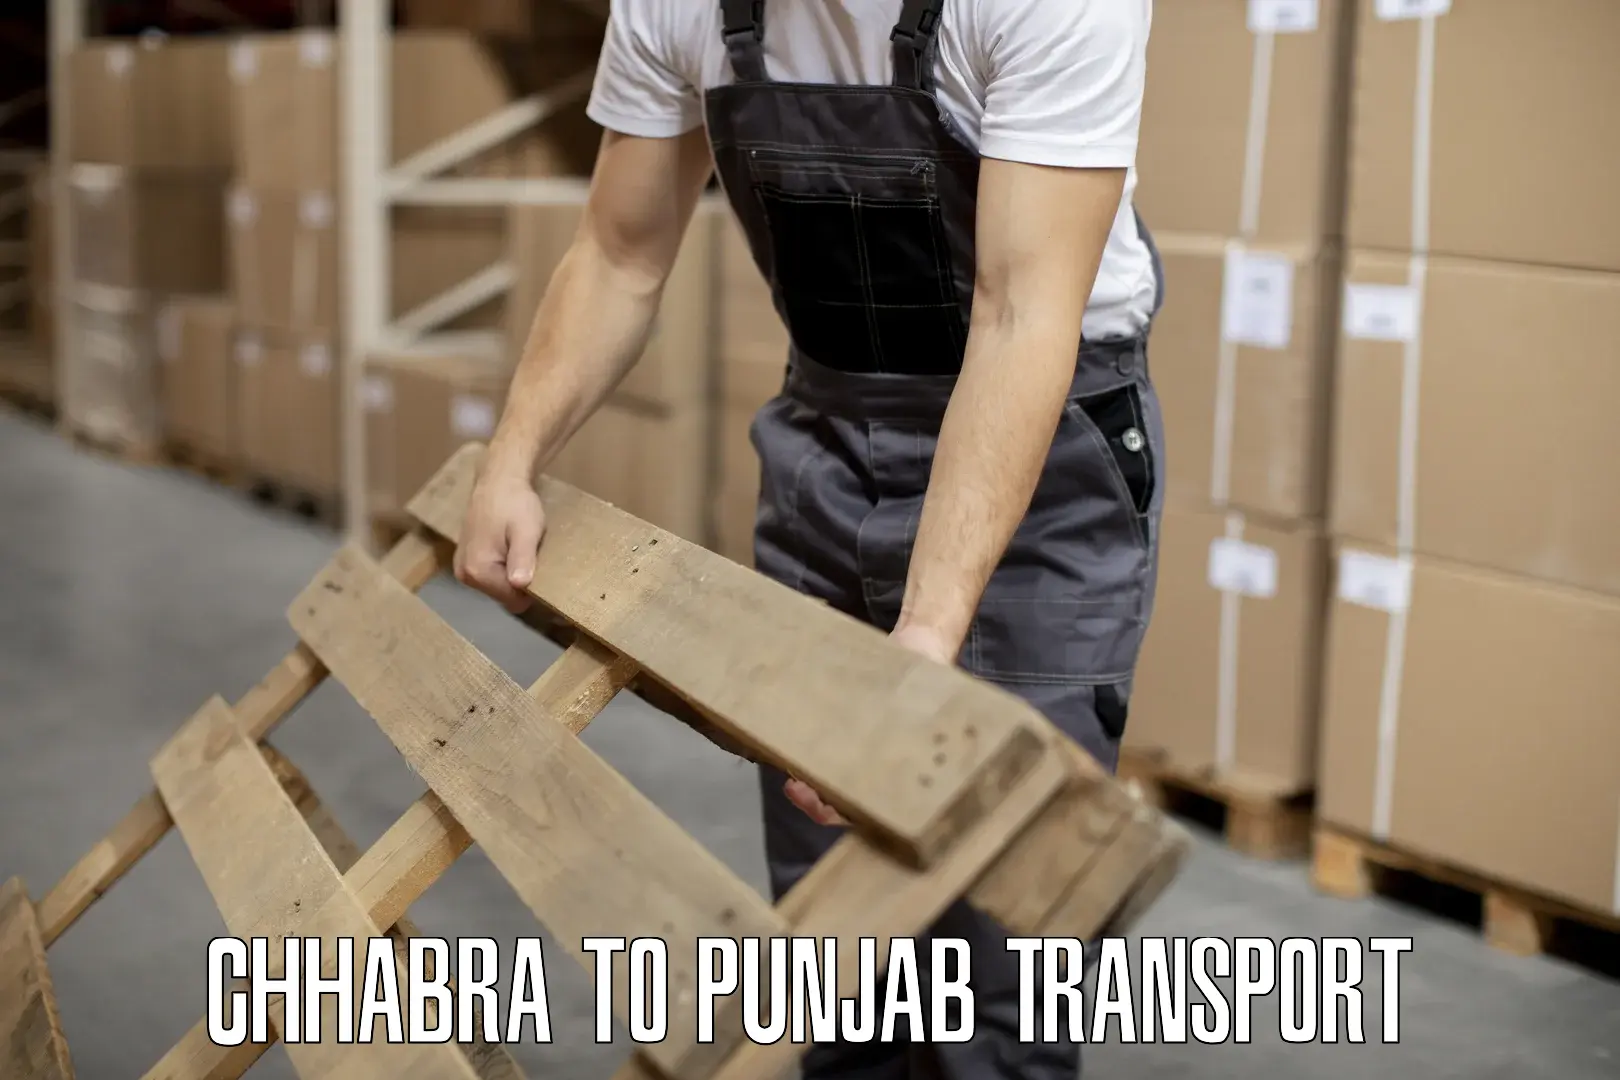 Part load transport service in India Chhabra to Amritsar